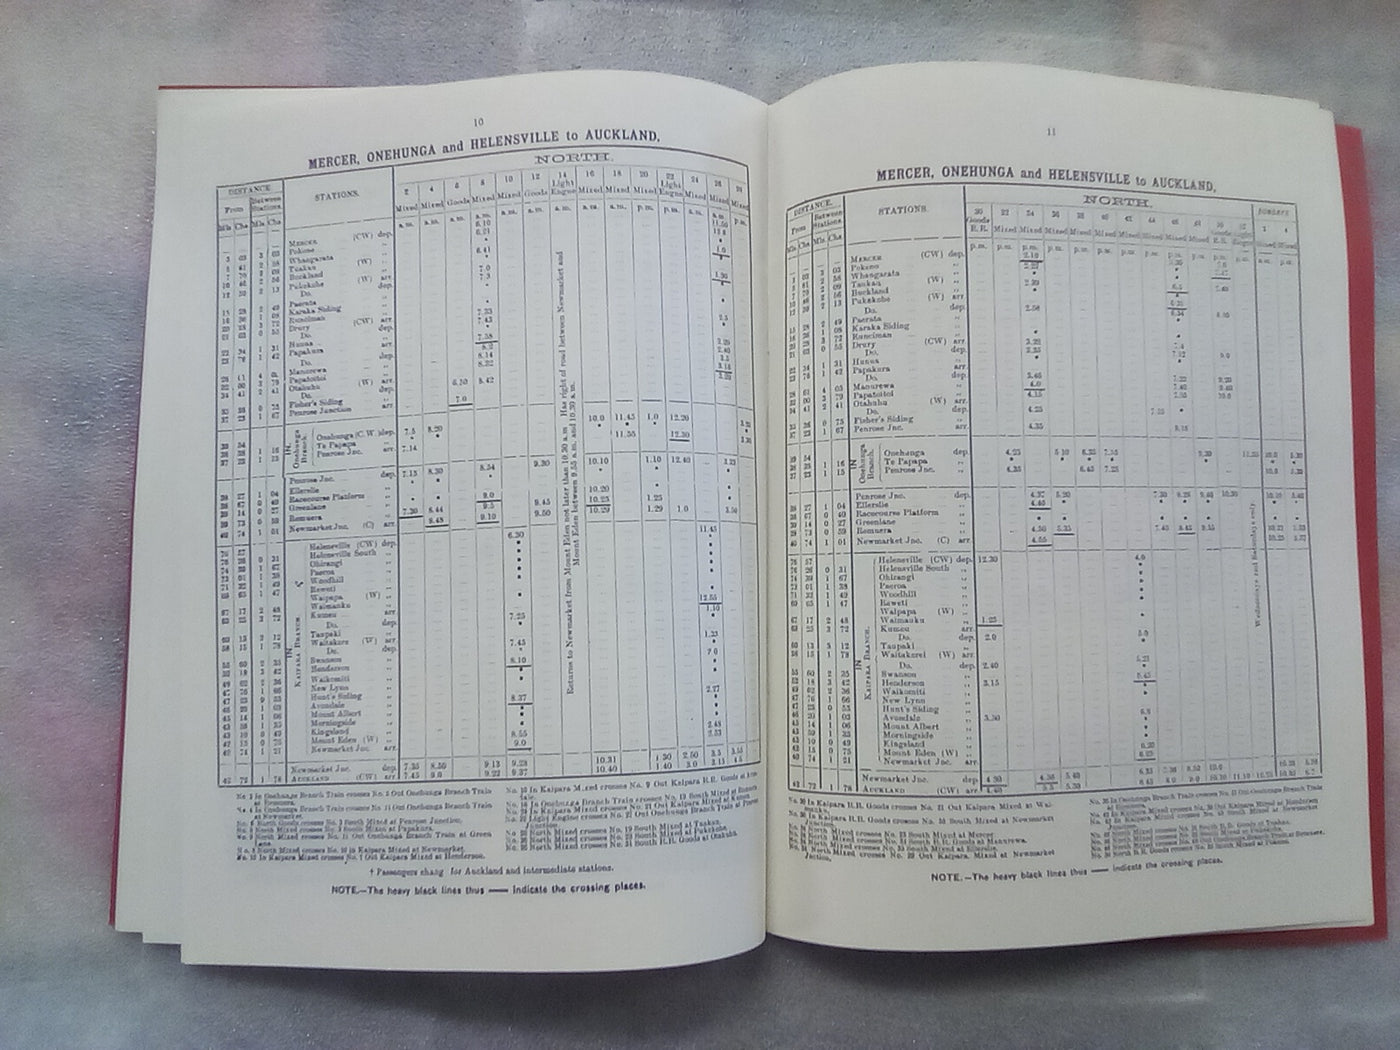 NZR Working Timetable - Auckland Section November 1884 (1984 Reprint)